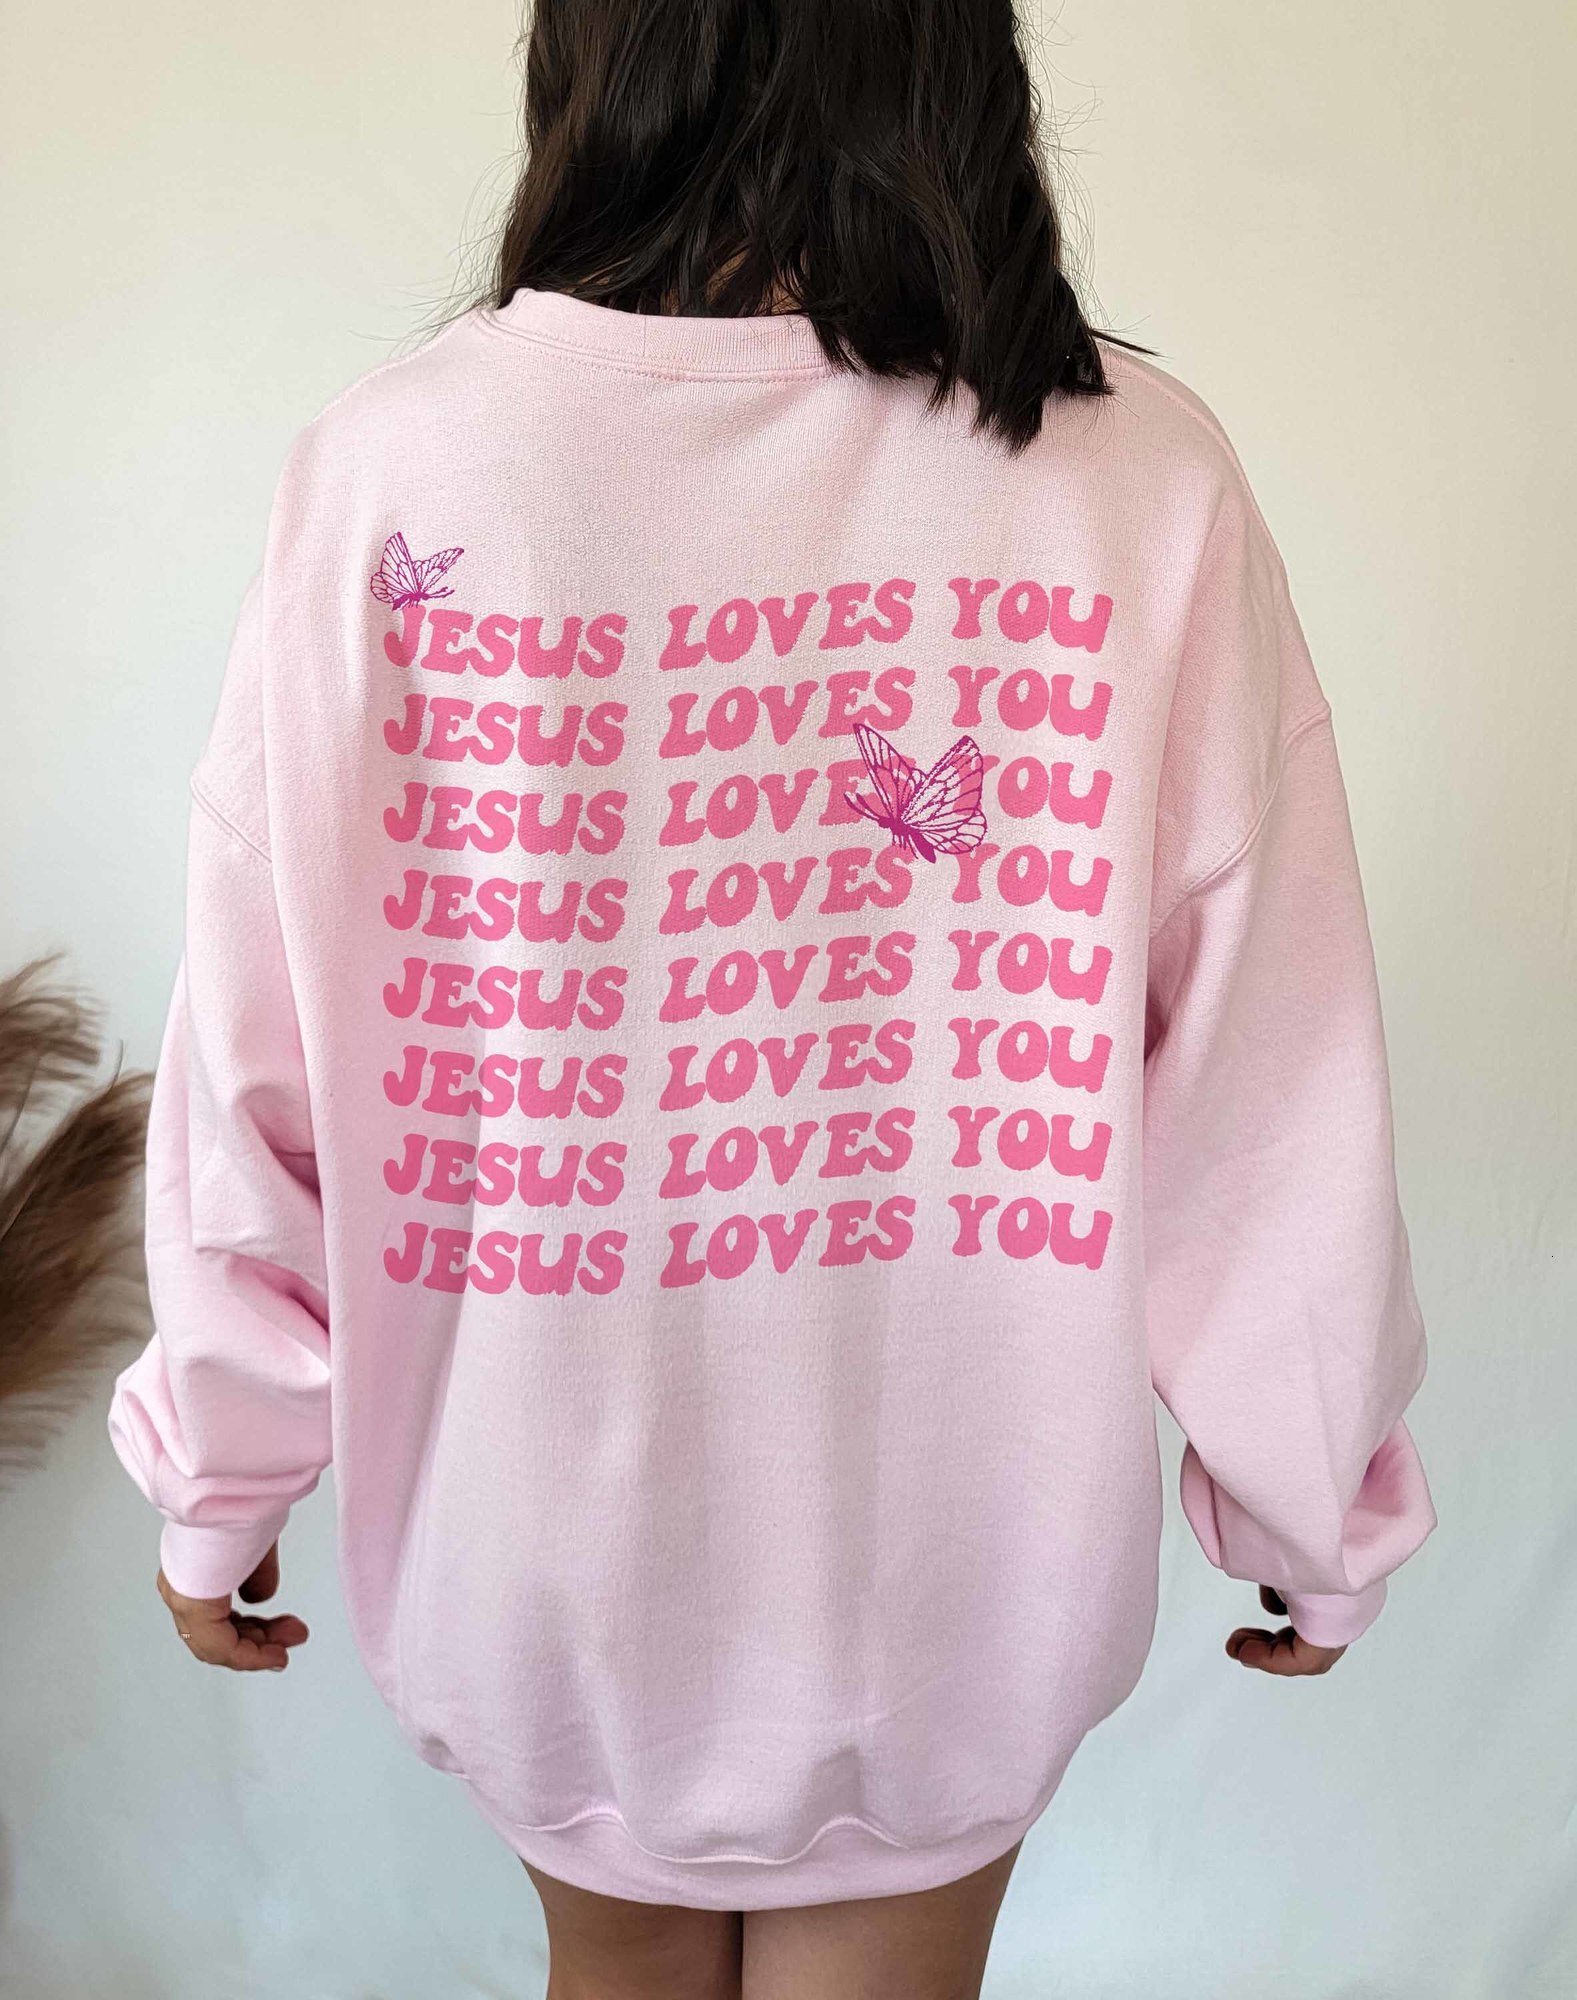 

Womens Two Piece Pants Jesus Loves You Butterfly Christian Sweatshirt pullovers youngs graphic religion church quote hipster vintage tops 230227, White